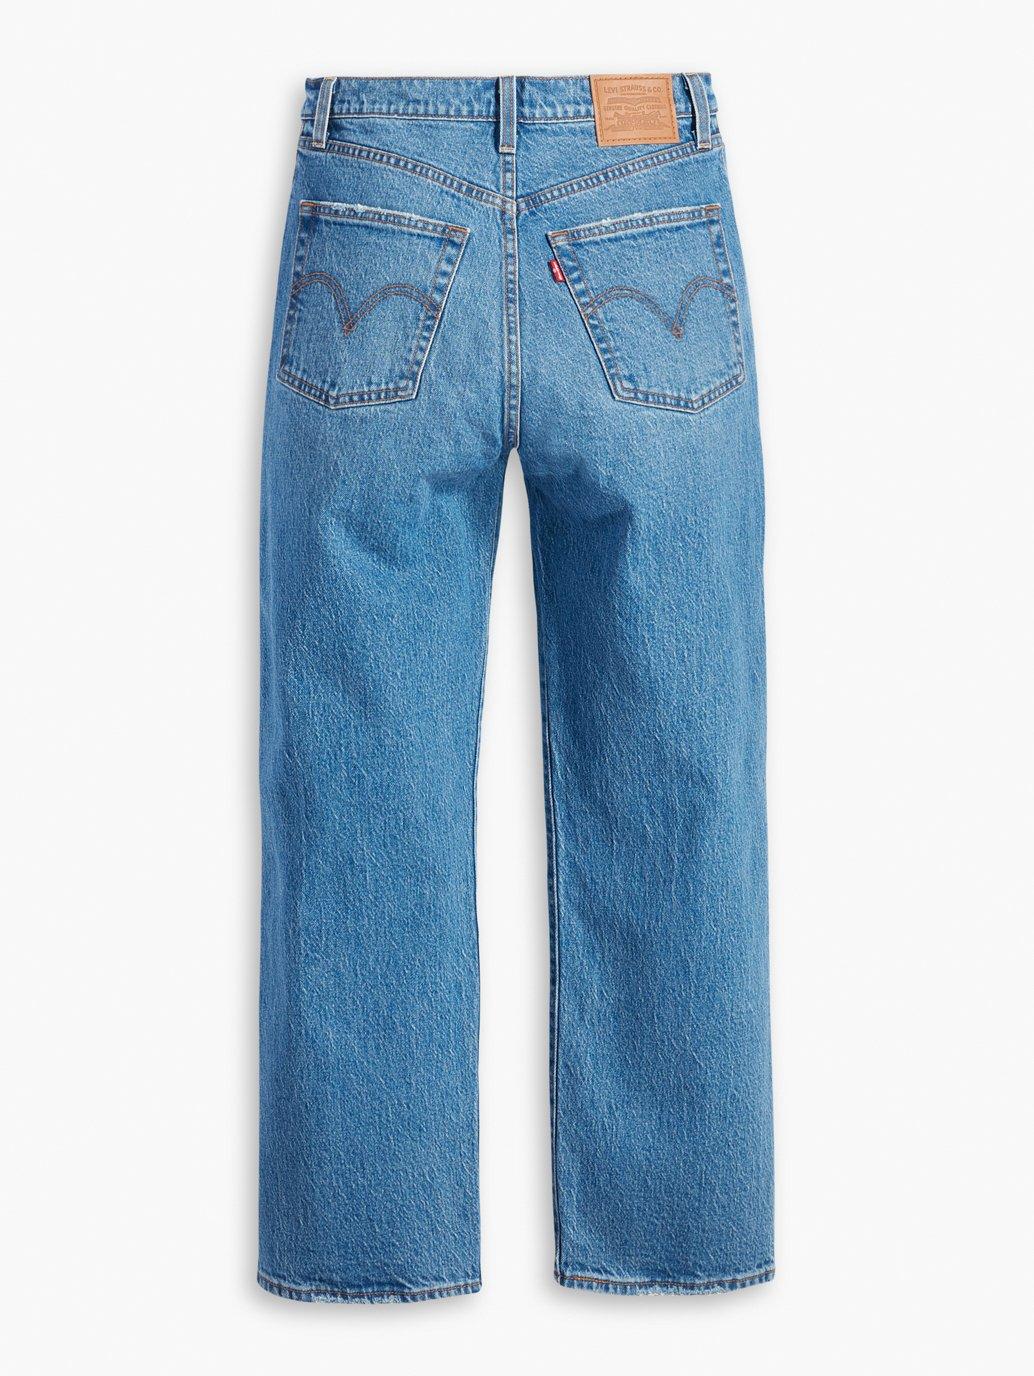 Buy Levi's® Women's Ribcage Straight Ankle Jeans | Levi’s® Official ...